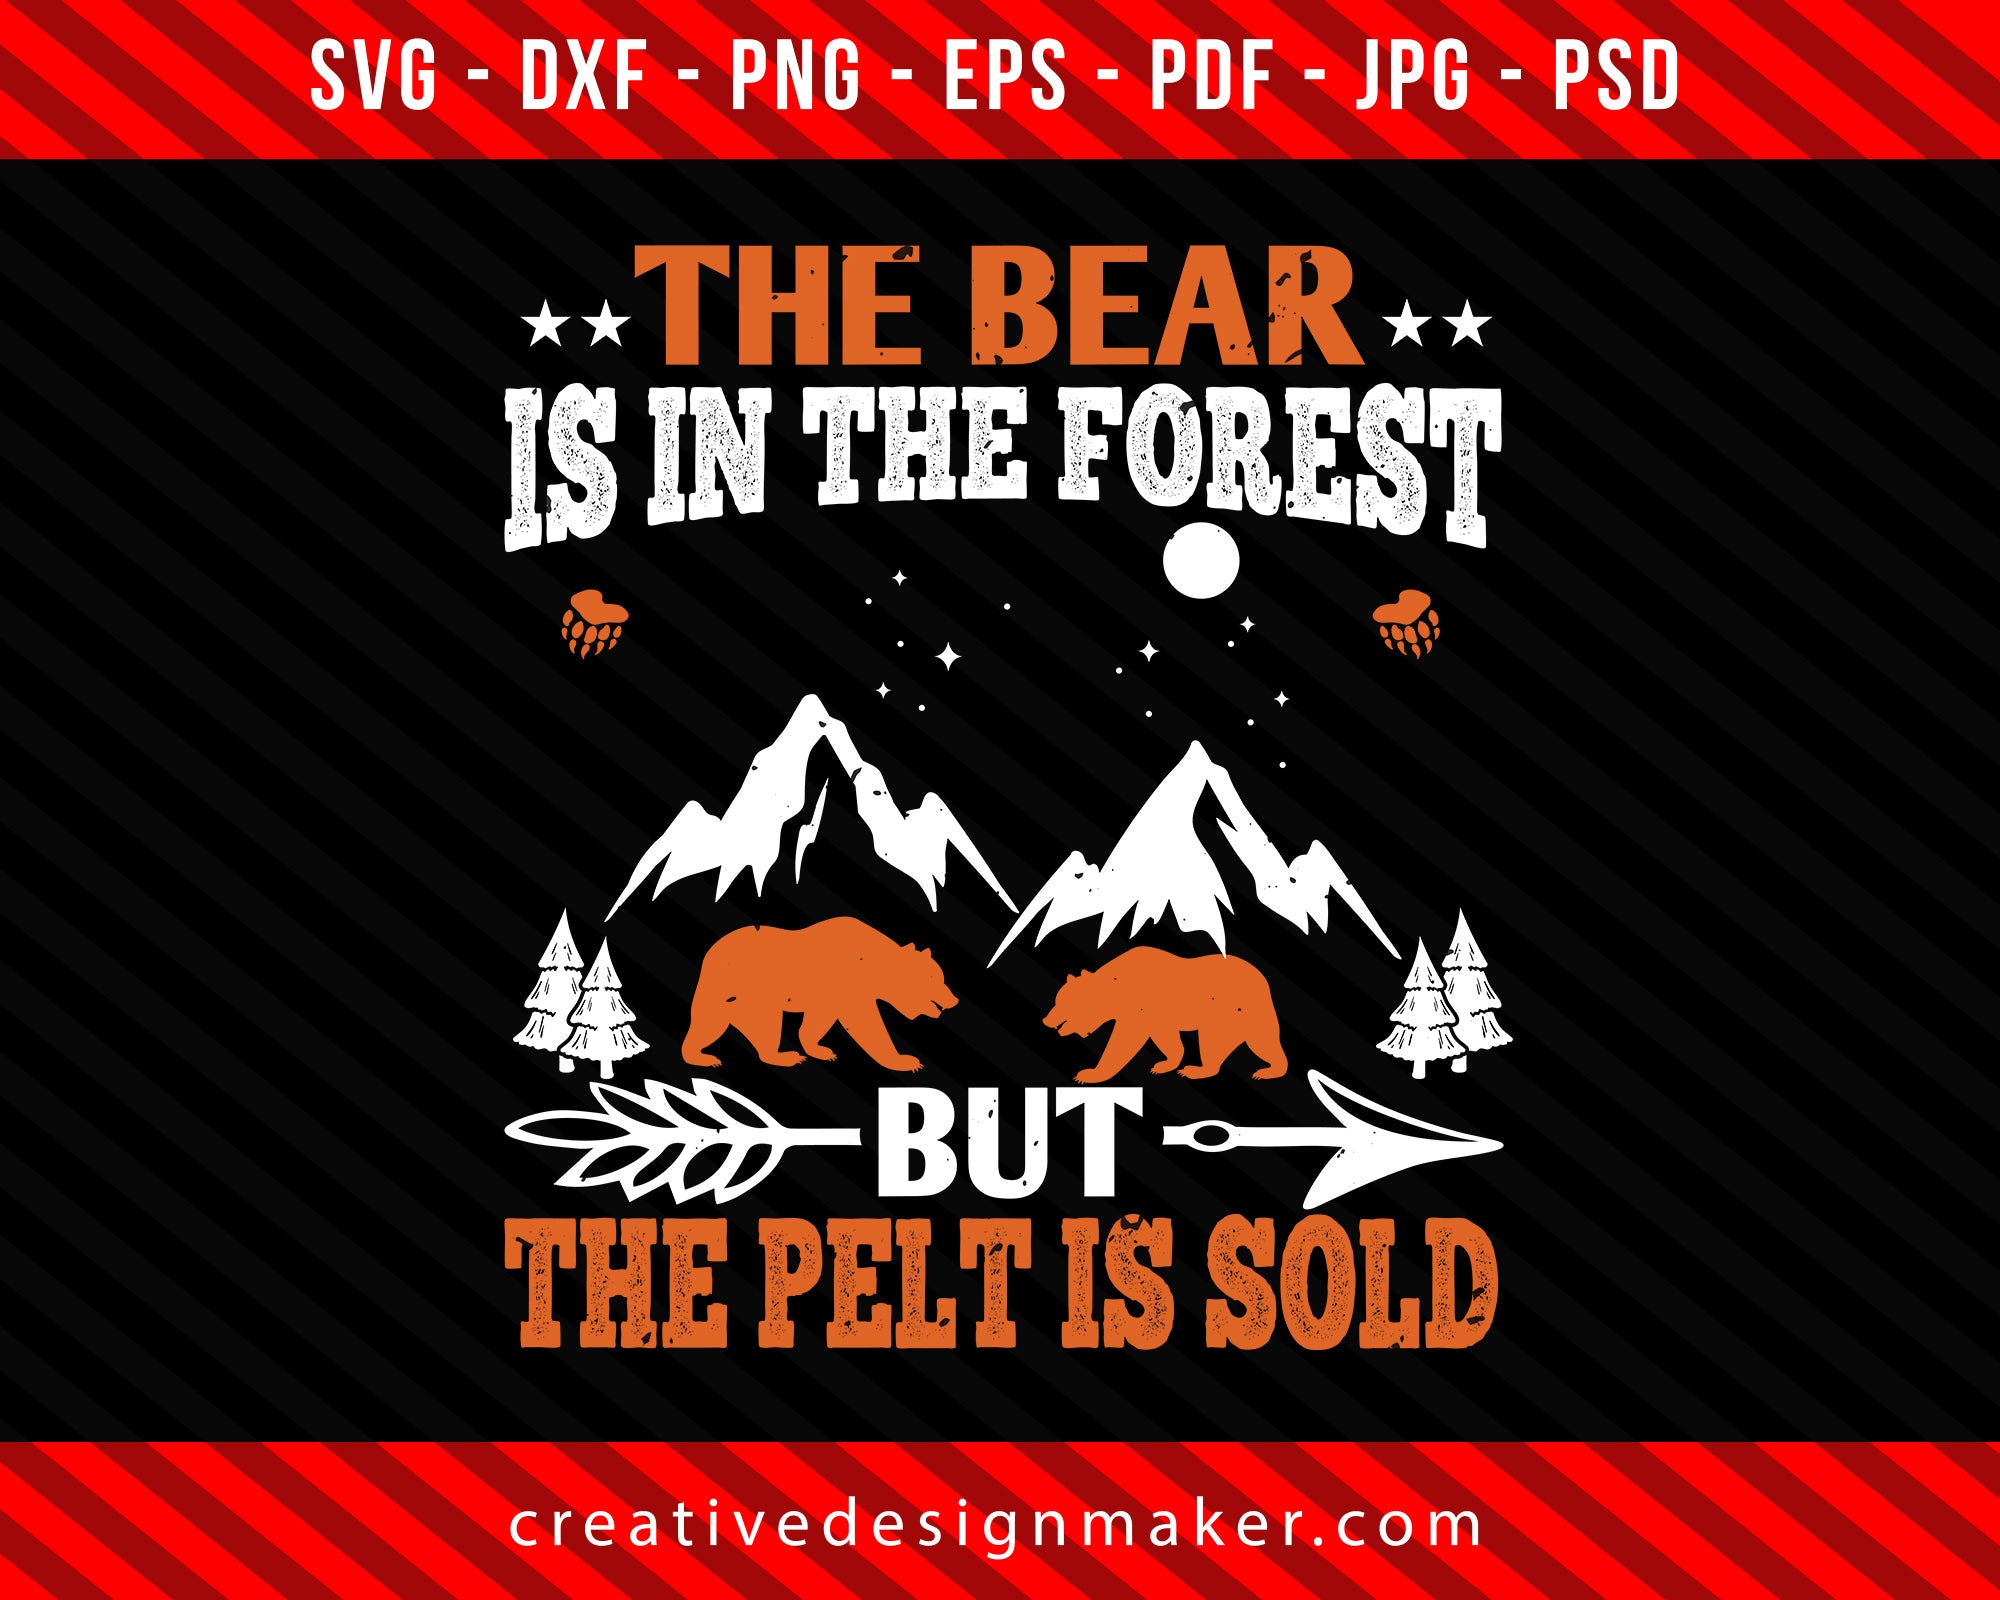 The bear is in the forest, but the pelt is soldd Bear Print Ready Editable T-Shirt SVG Design!